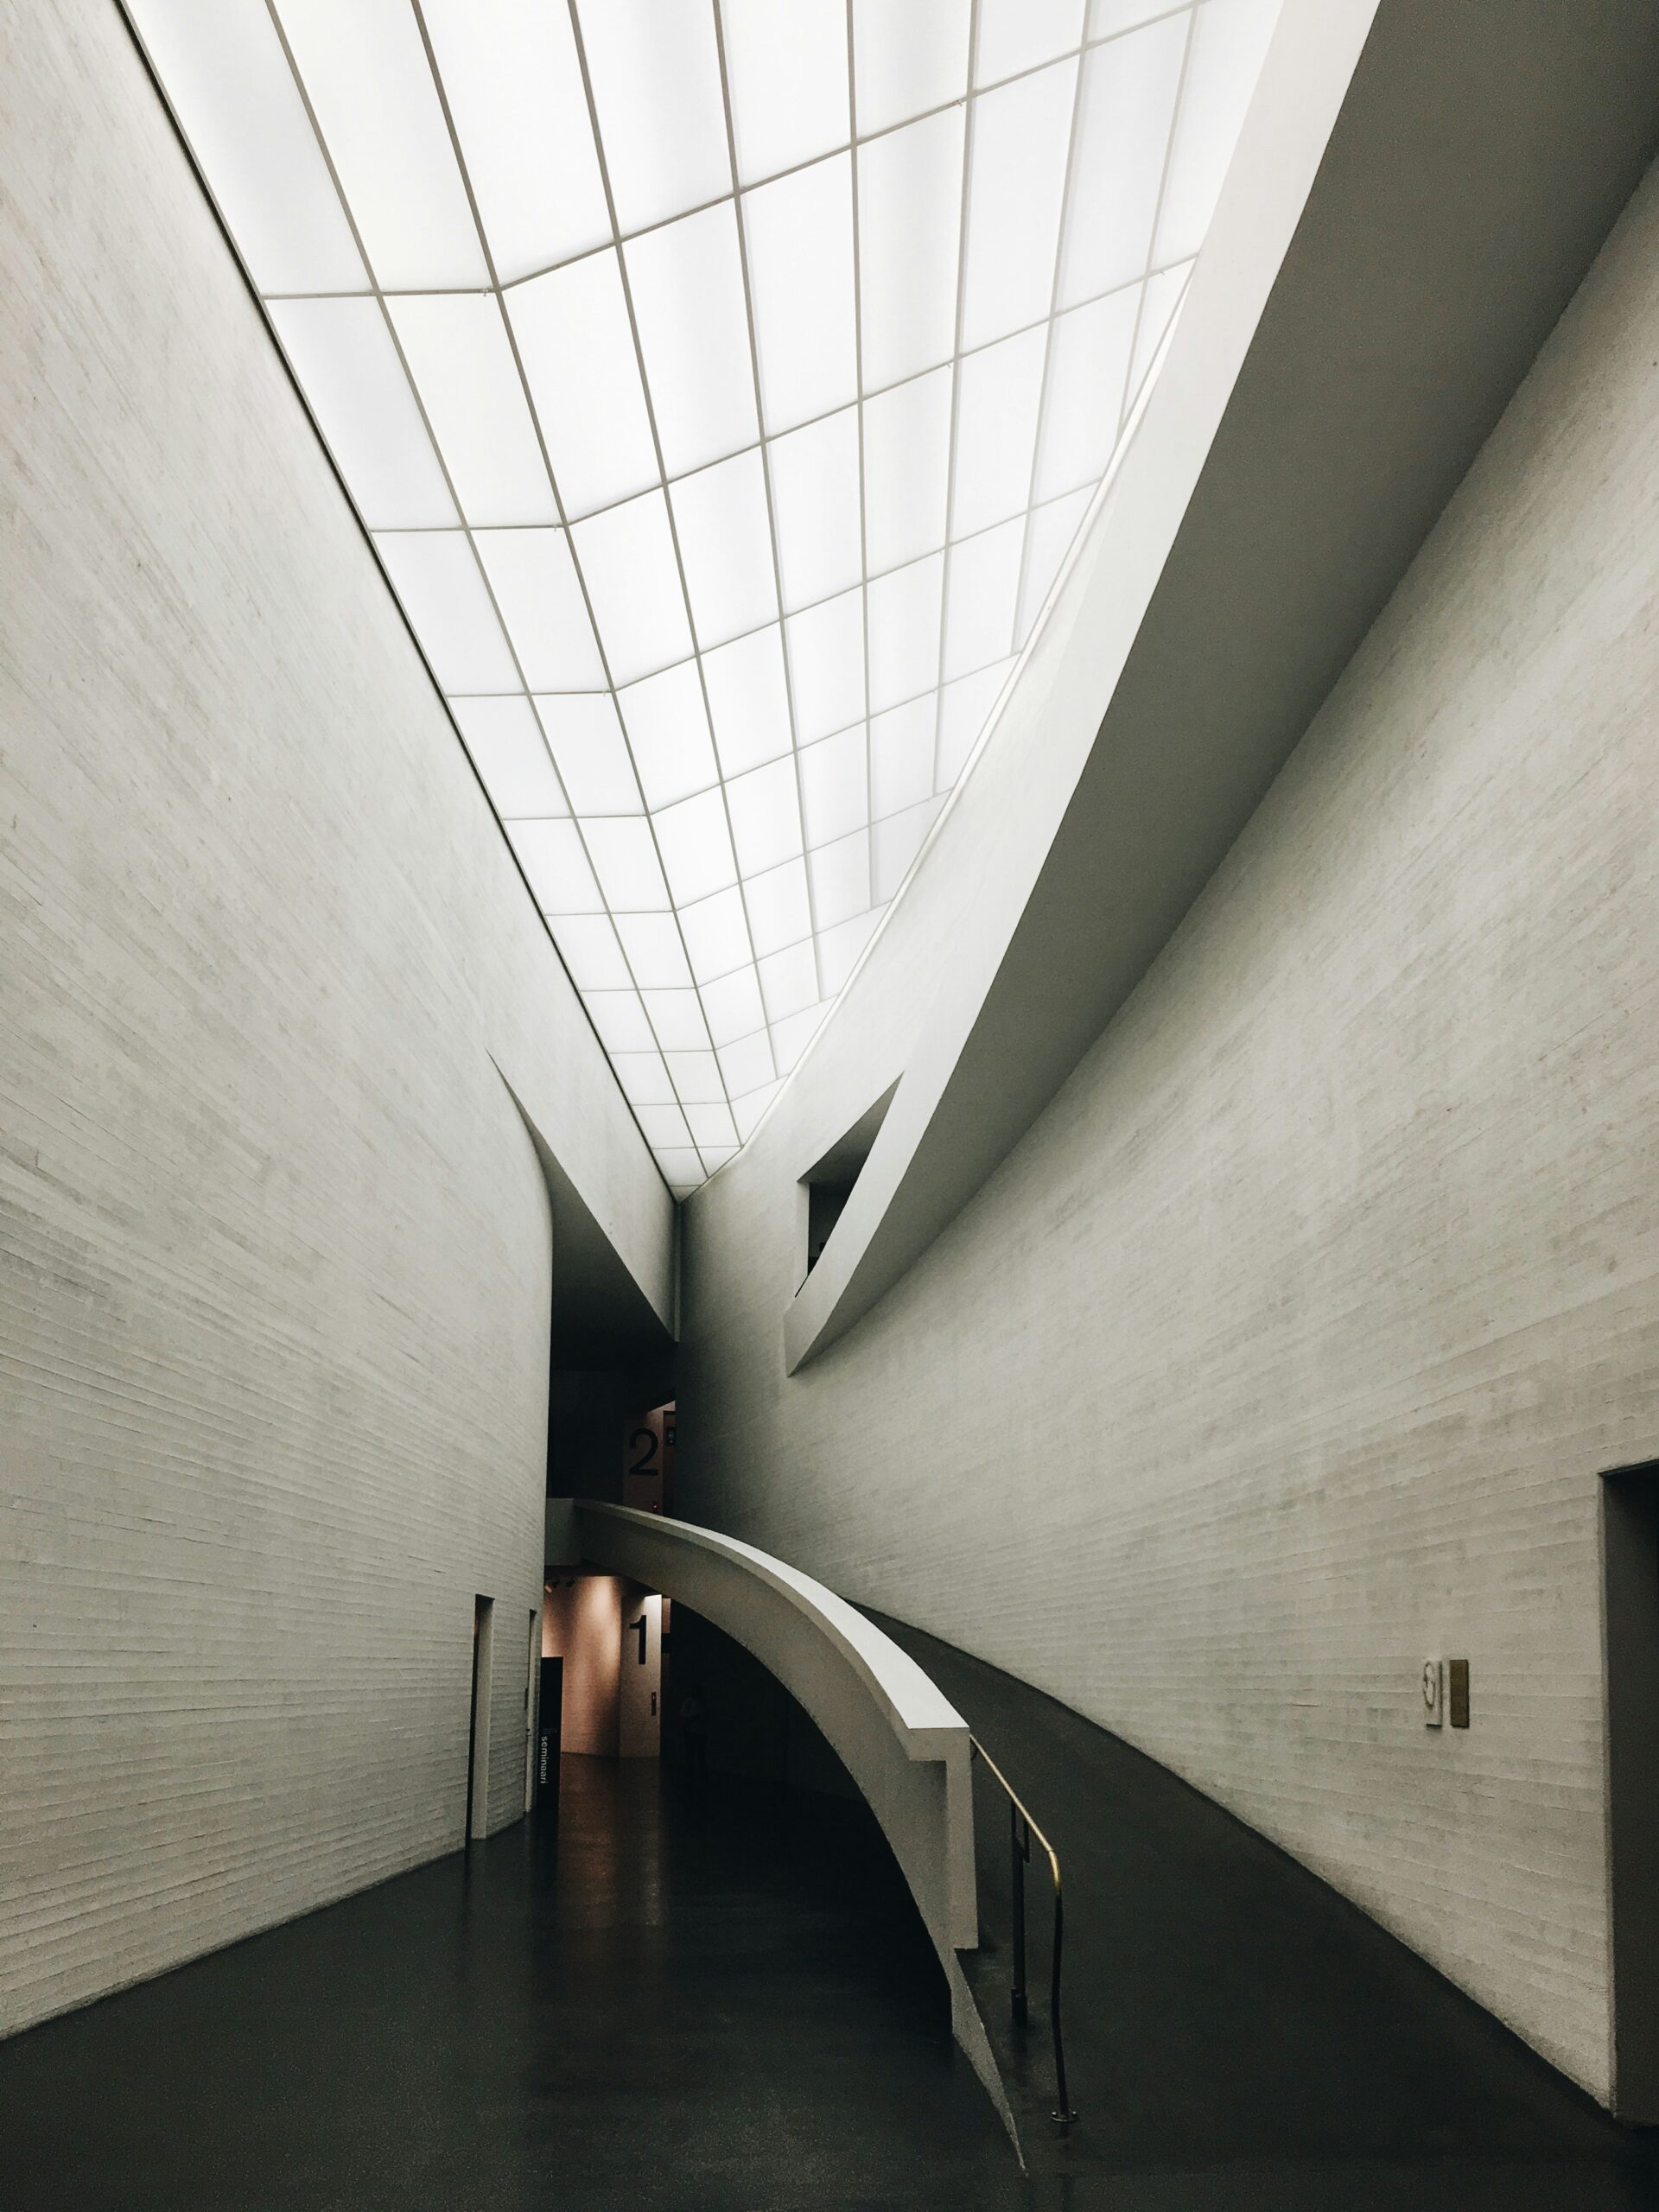 Modern interior of a white building with long ramp leading to higher level. Photo by Stefan Spassov on Unsplash.